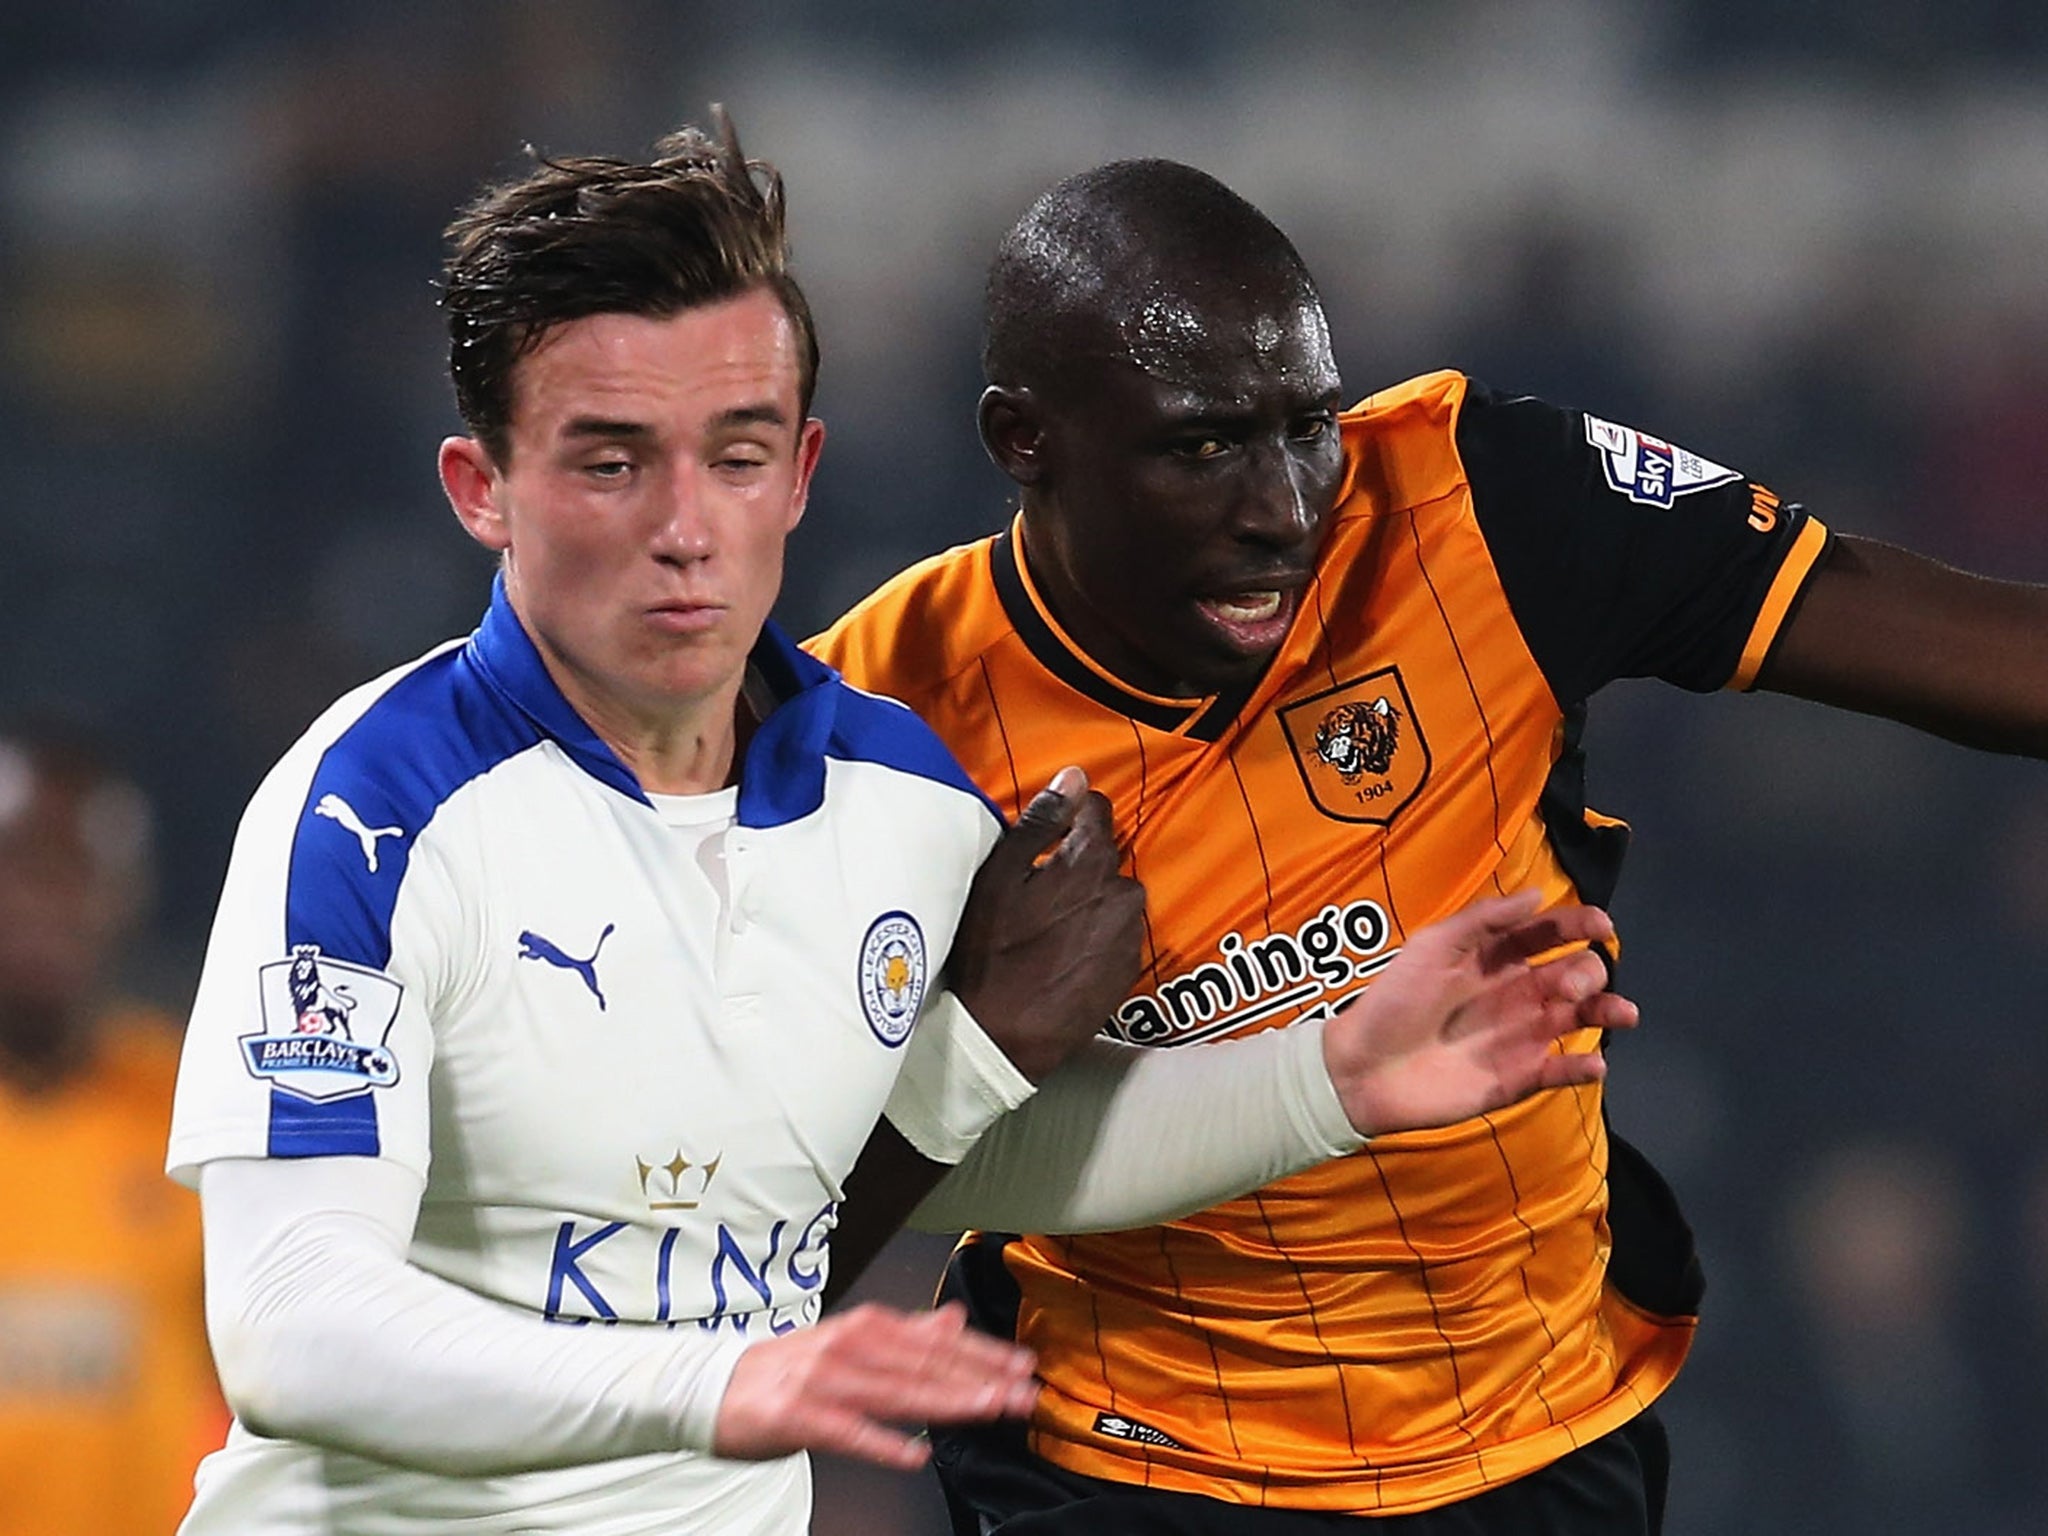 Leicester City youngster Ben Chilwell takes on Hully City's Mo Diame